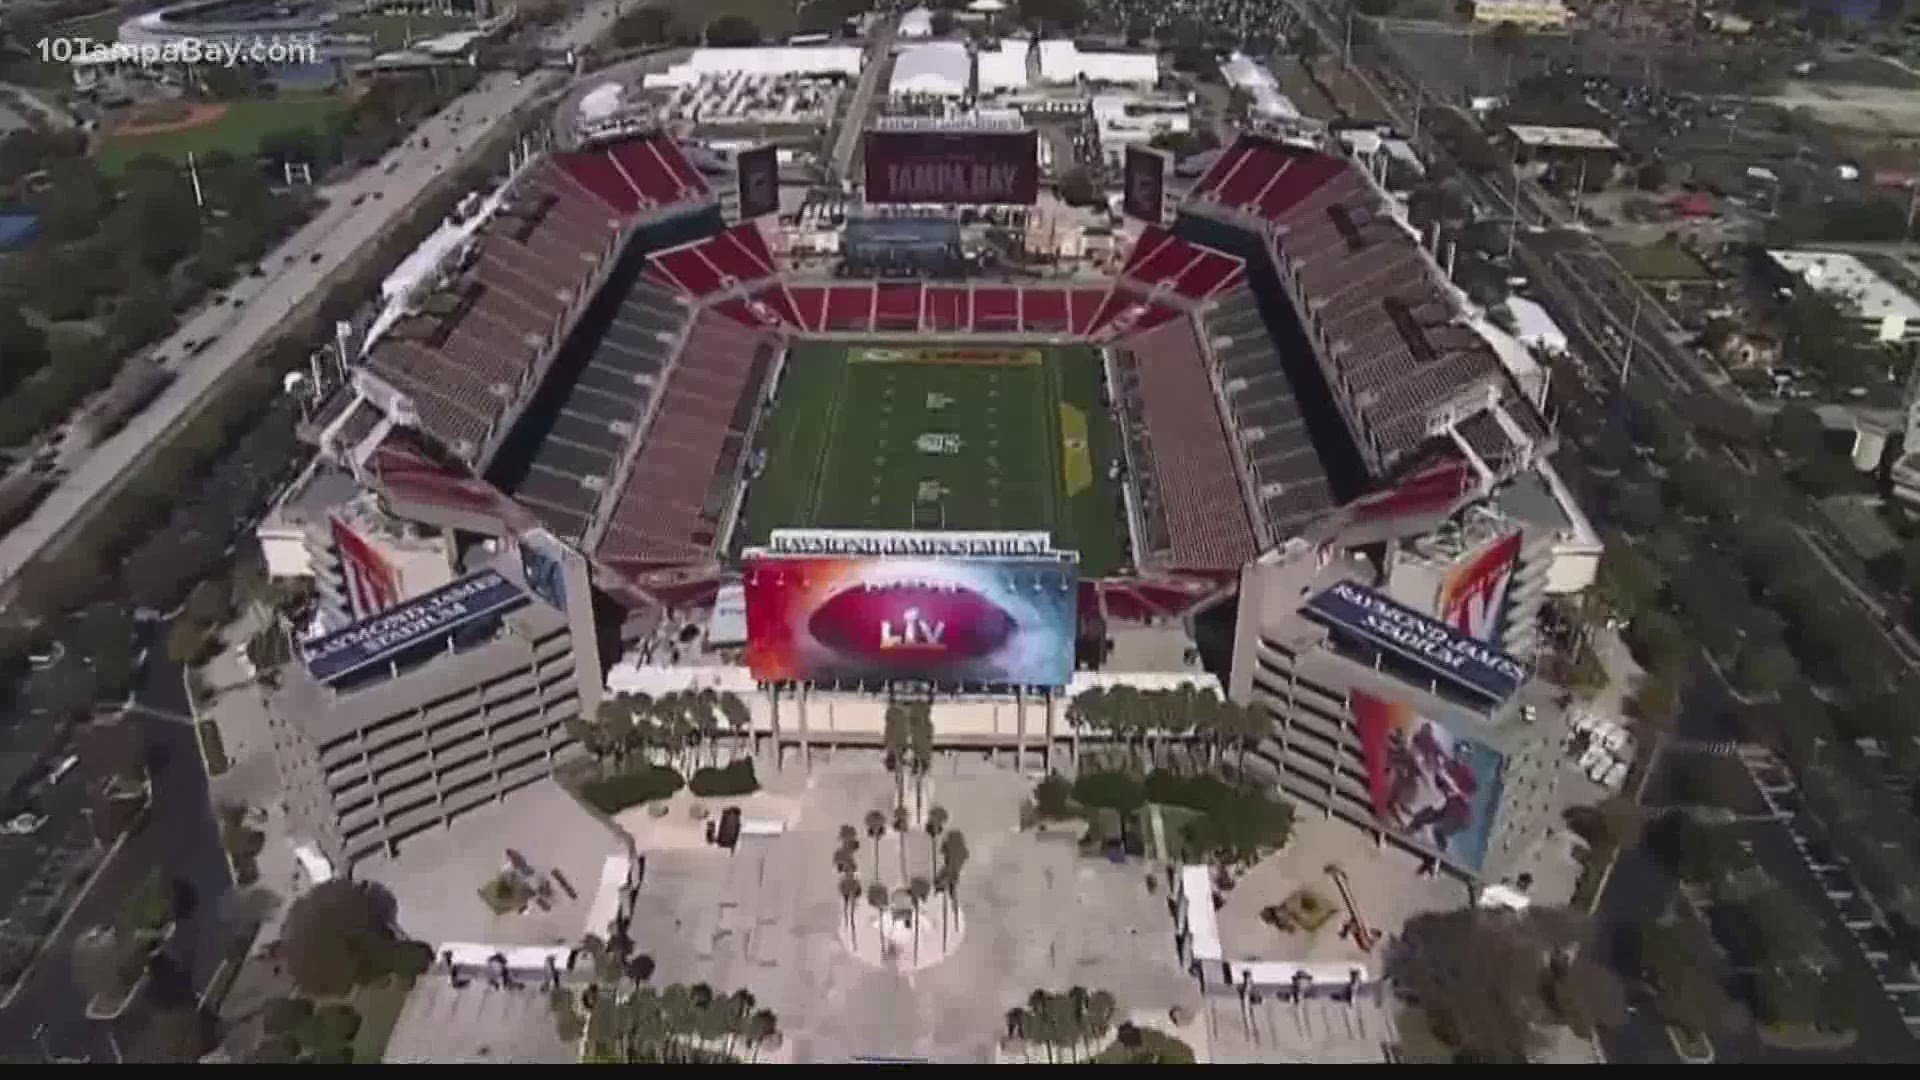 Super Bowl LV will be underway this time next Sunday on 10 Tampa Bay!